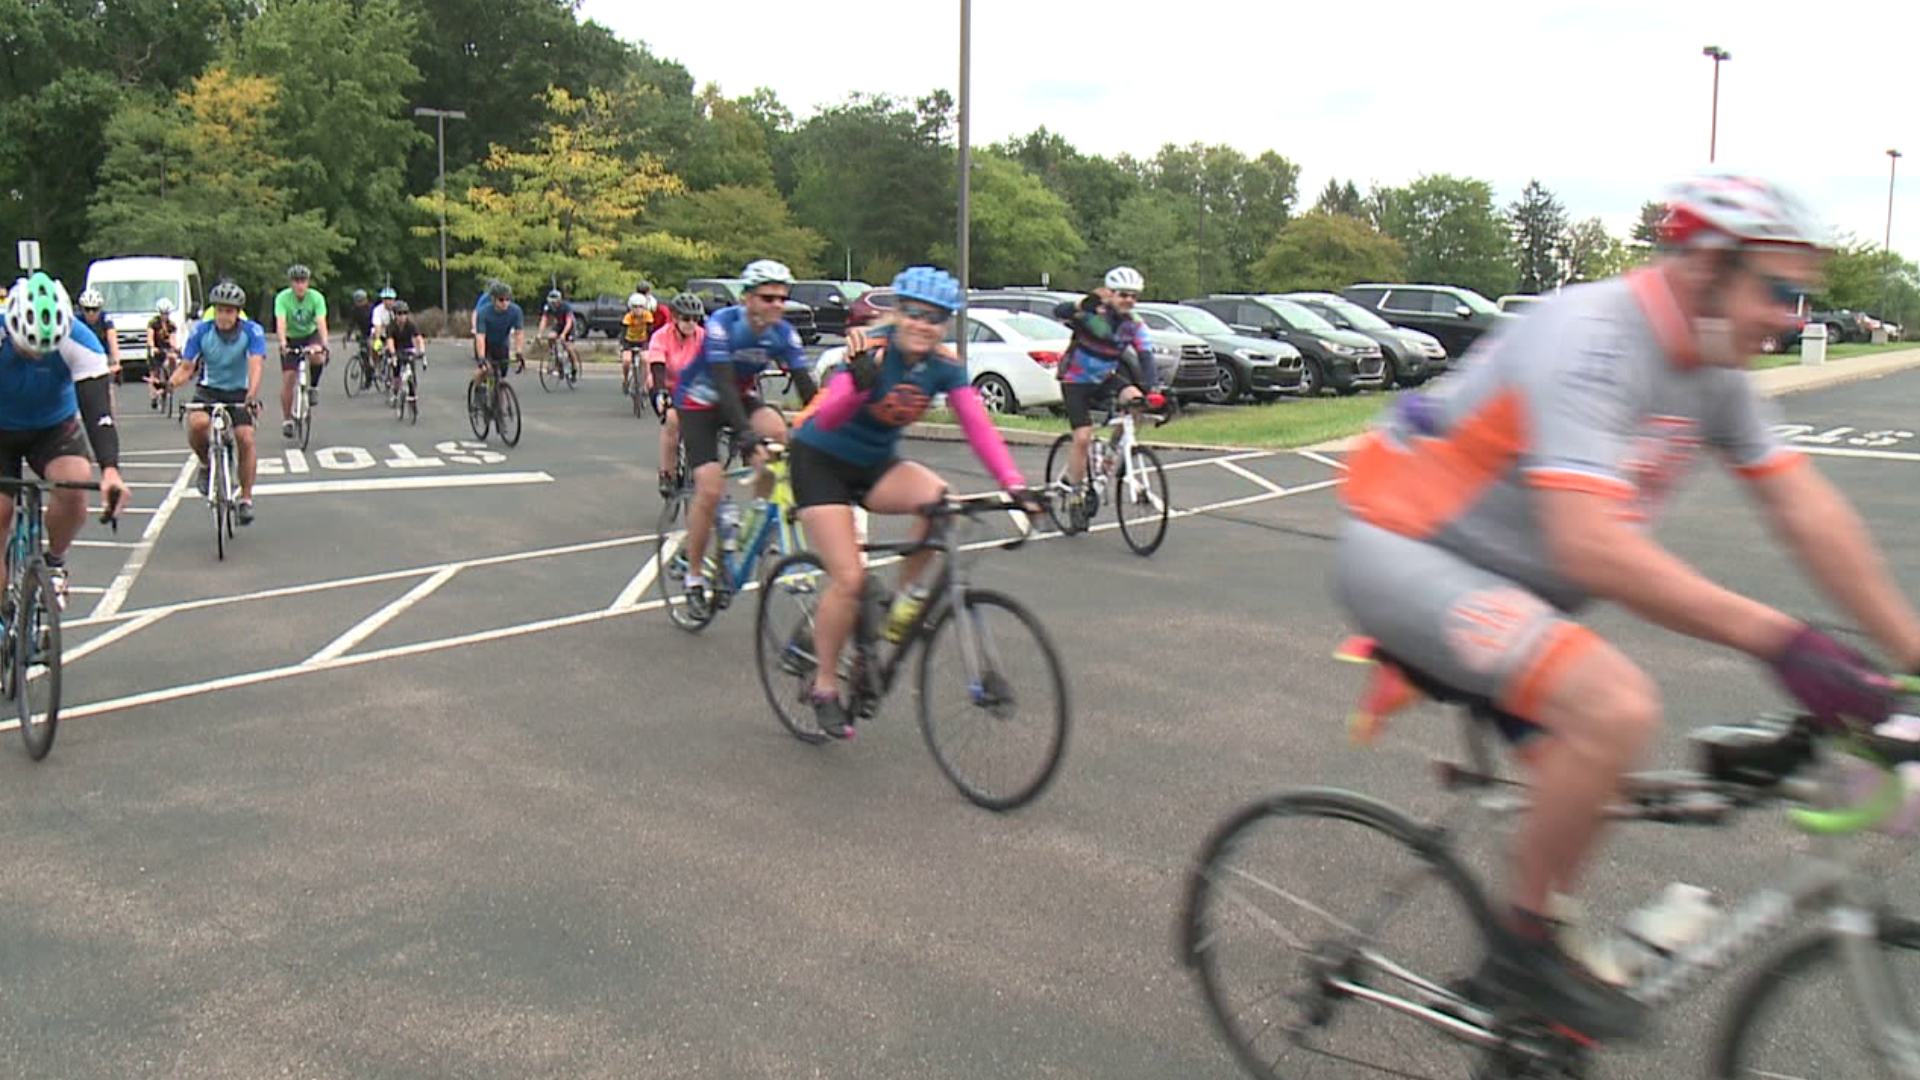 The 12th Annual Spencer Martin Memorial Bike Ride kicked off bright and early at Penn State Wilkes-Barre.